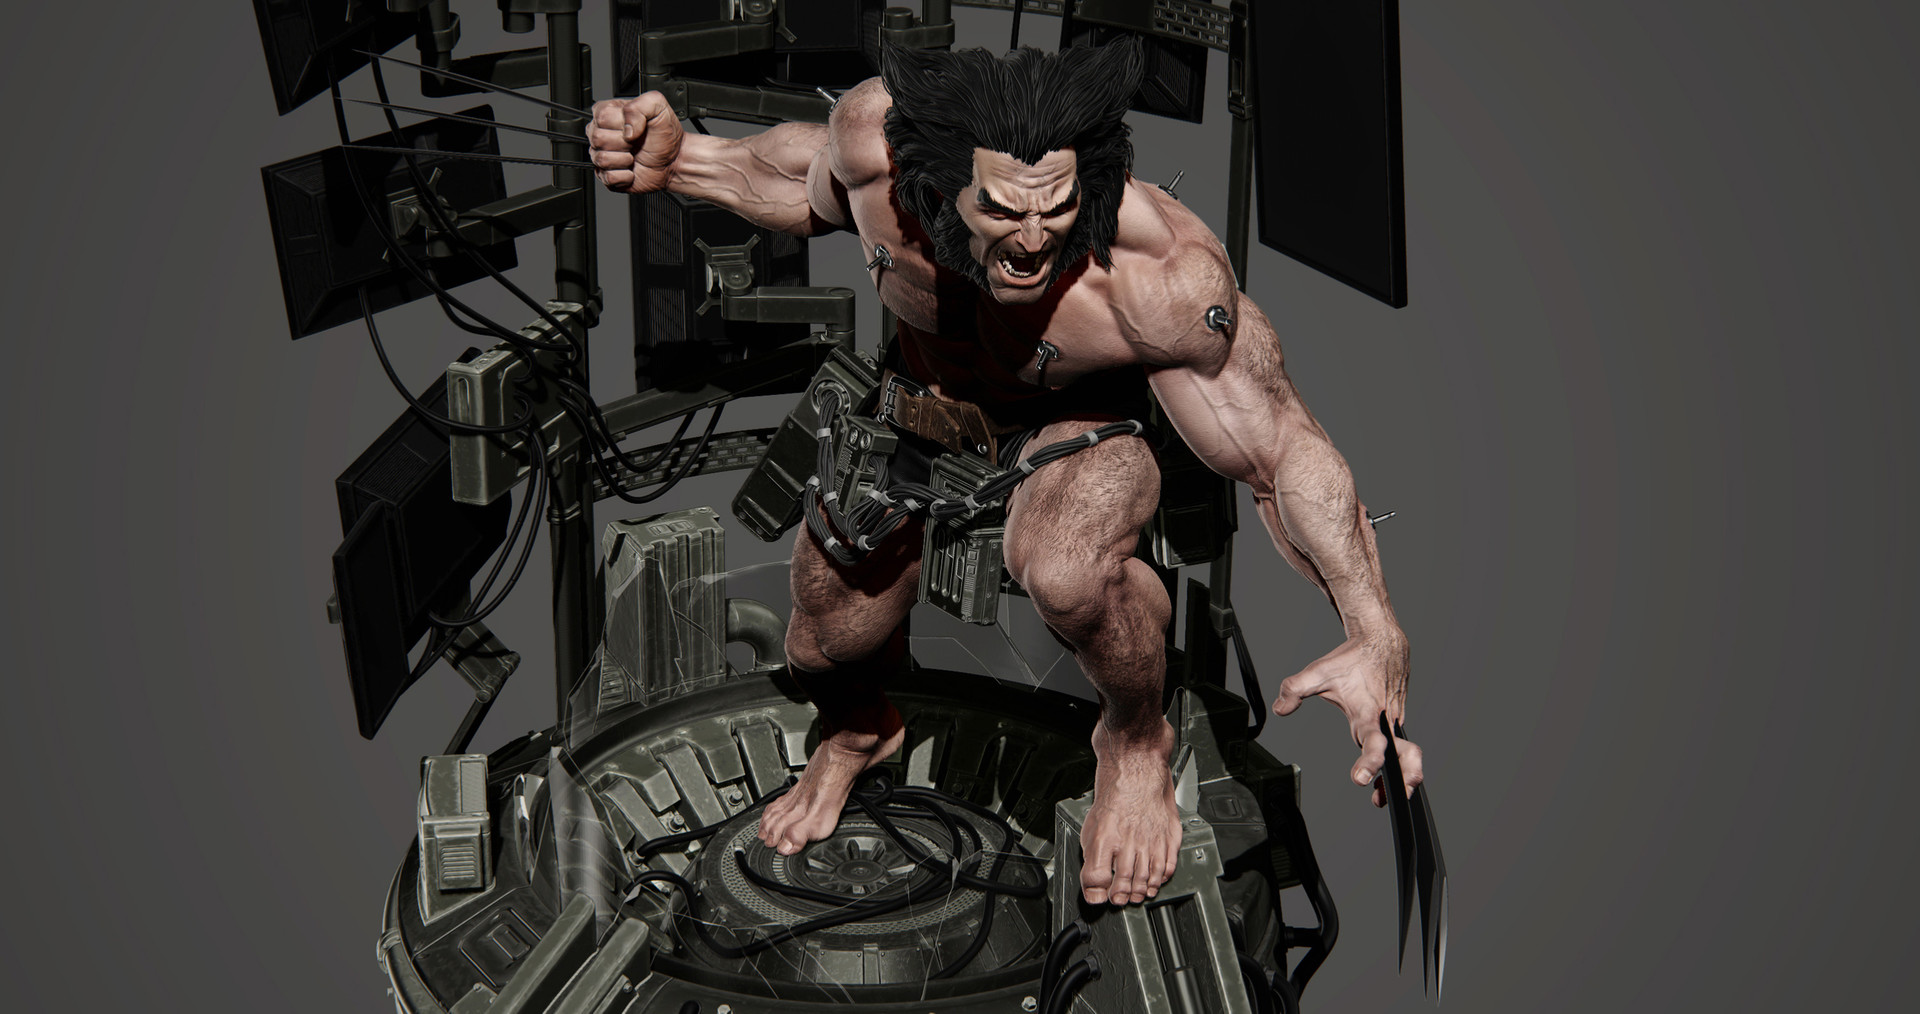 Weapon X #22